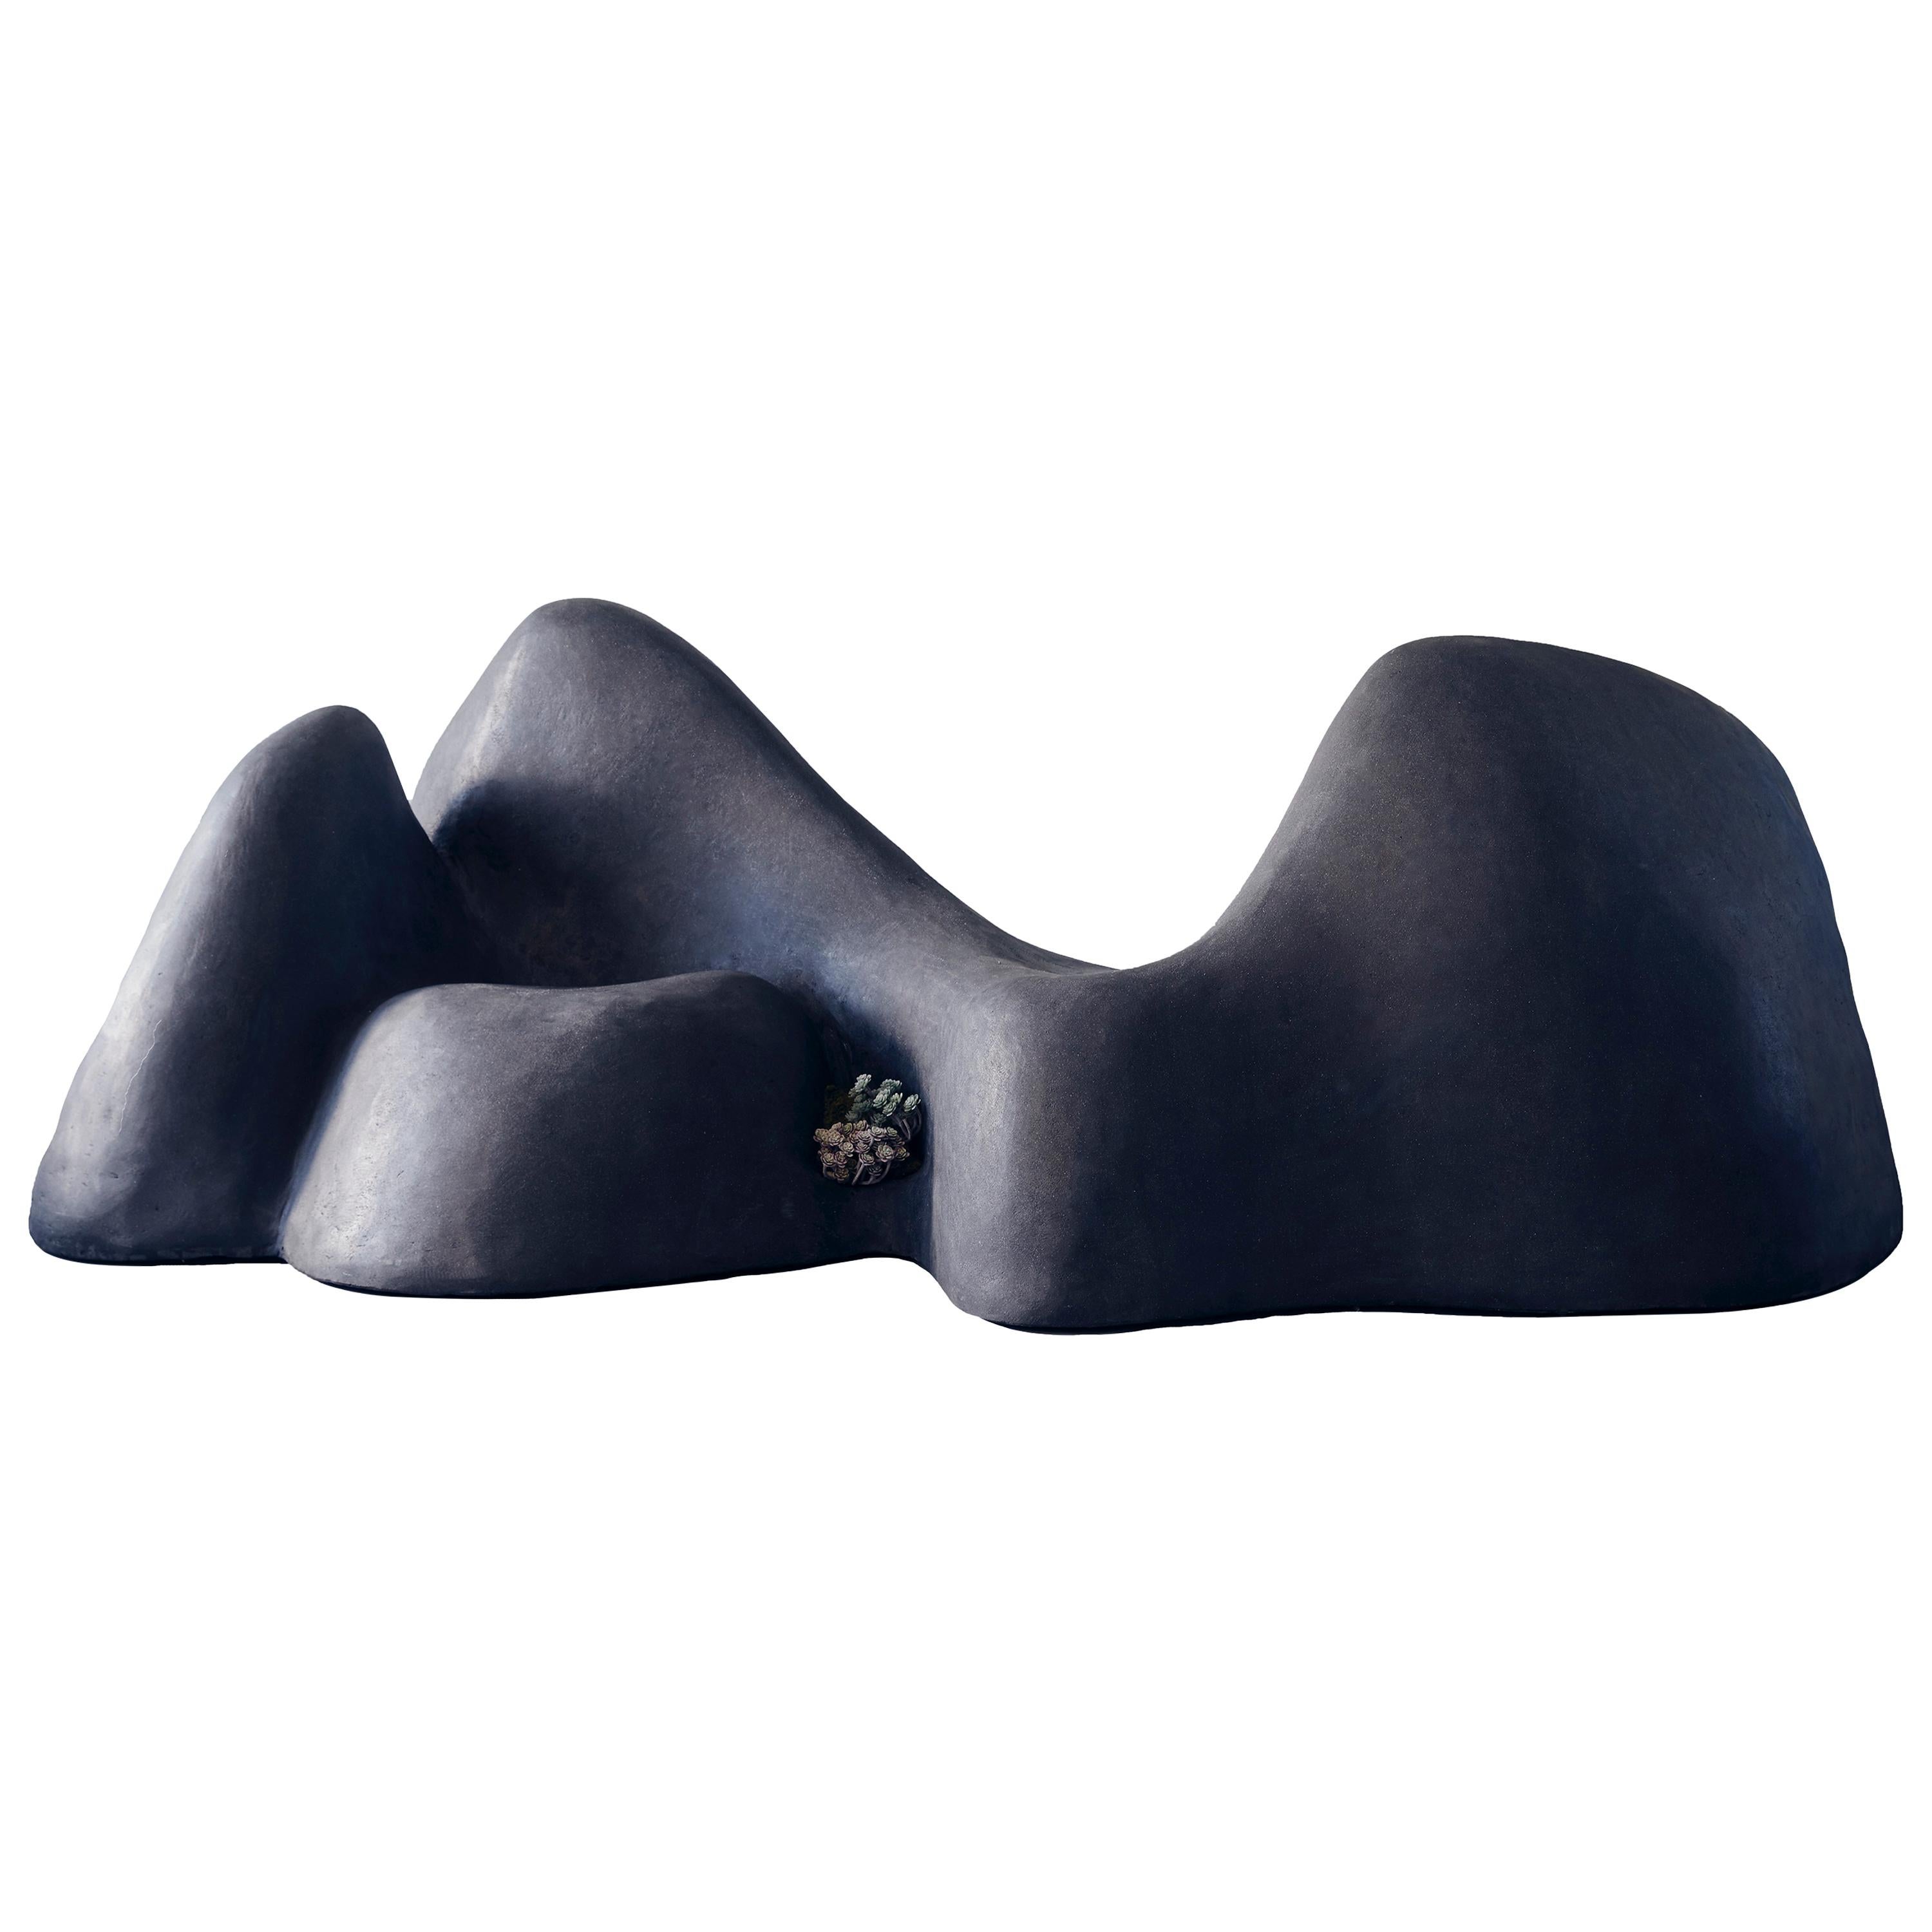 Soy Una Roca, Sculptural Concrete Seat by OPIARY